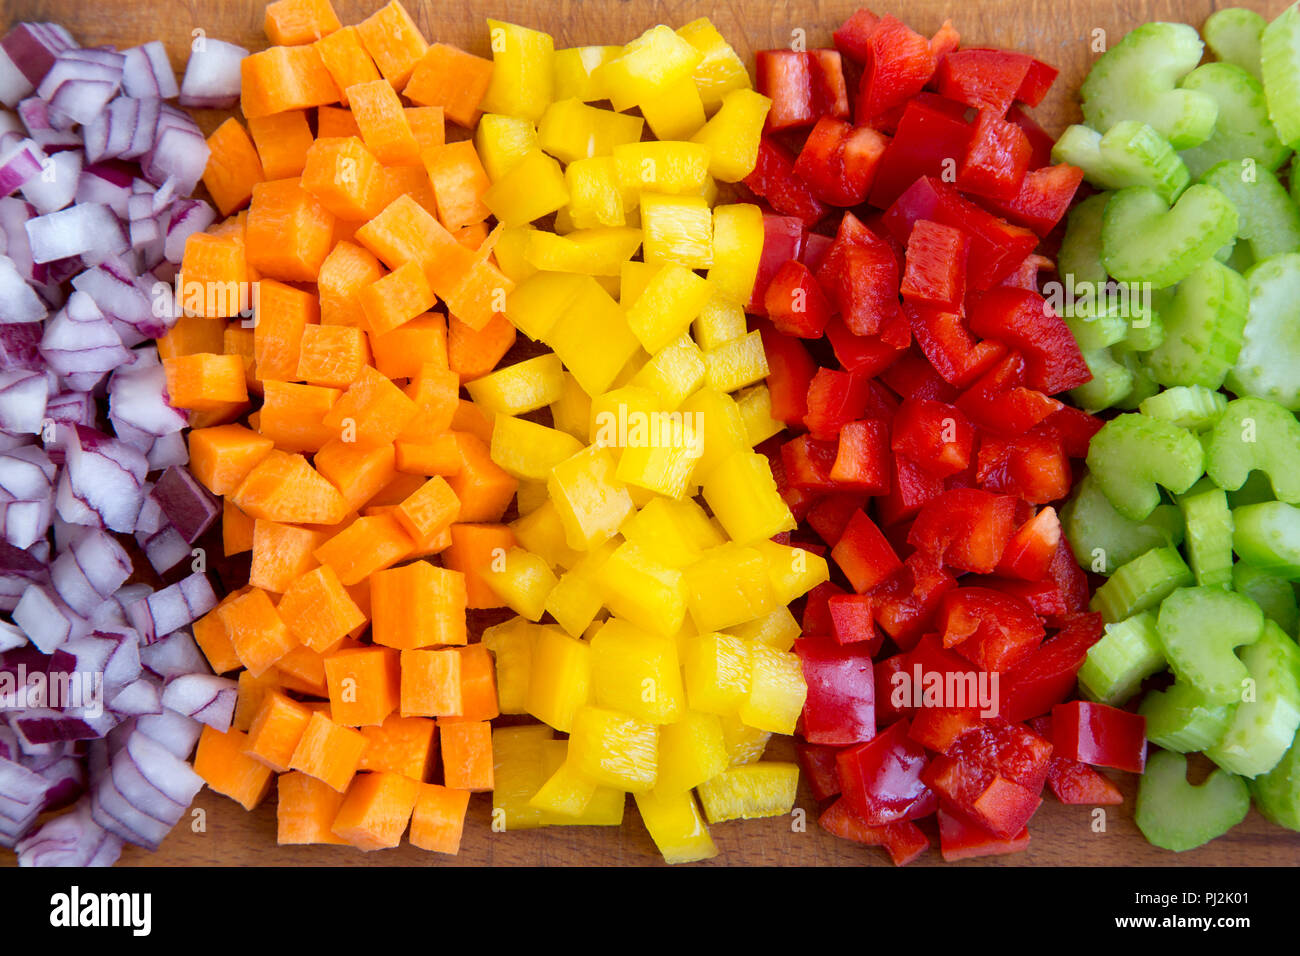 https://c8.alamy.com/comp/PJ2K01/chopped-fresh-vegetables-carrot-celery-red-onion-peppers-arranged-on-cutting-board-overhead-view-close-up-PJ2K01.jpg